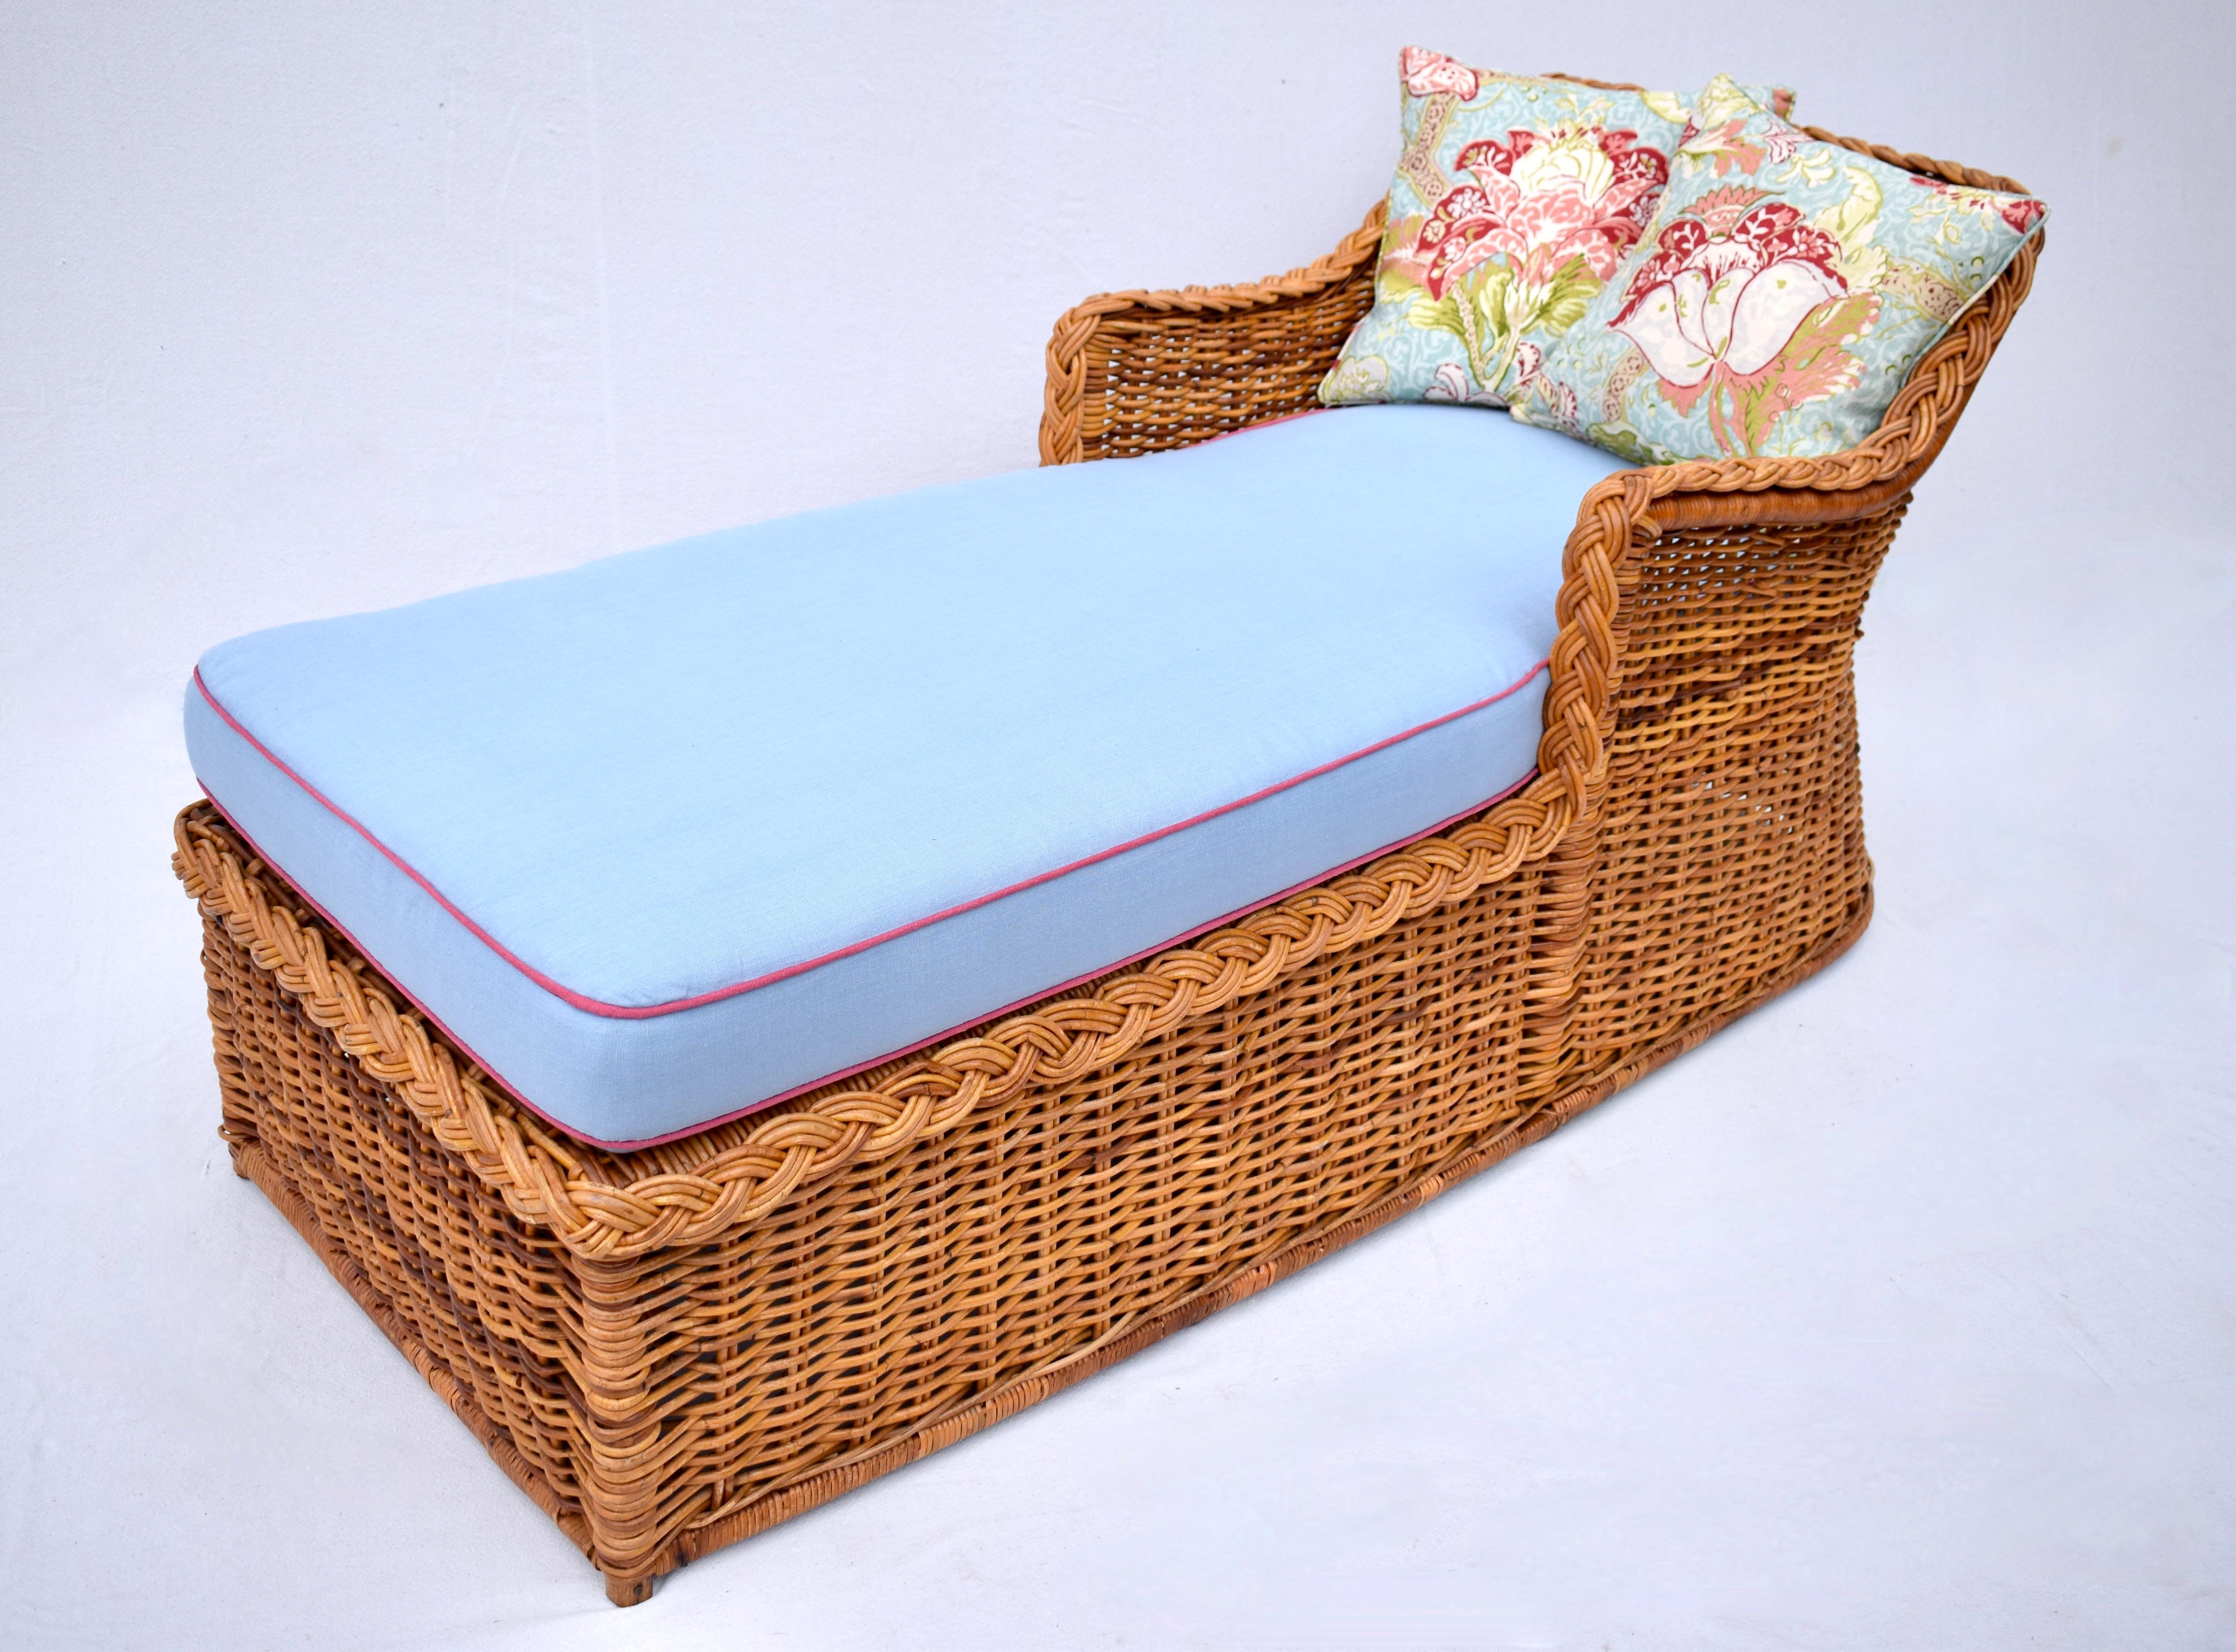 1960's Michael Taylor Braided Wicker Rattan Chaise Lounge Daybed For Sale 8